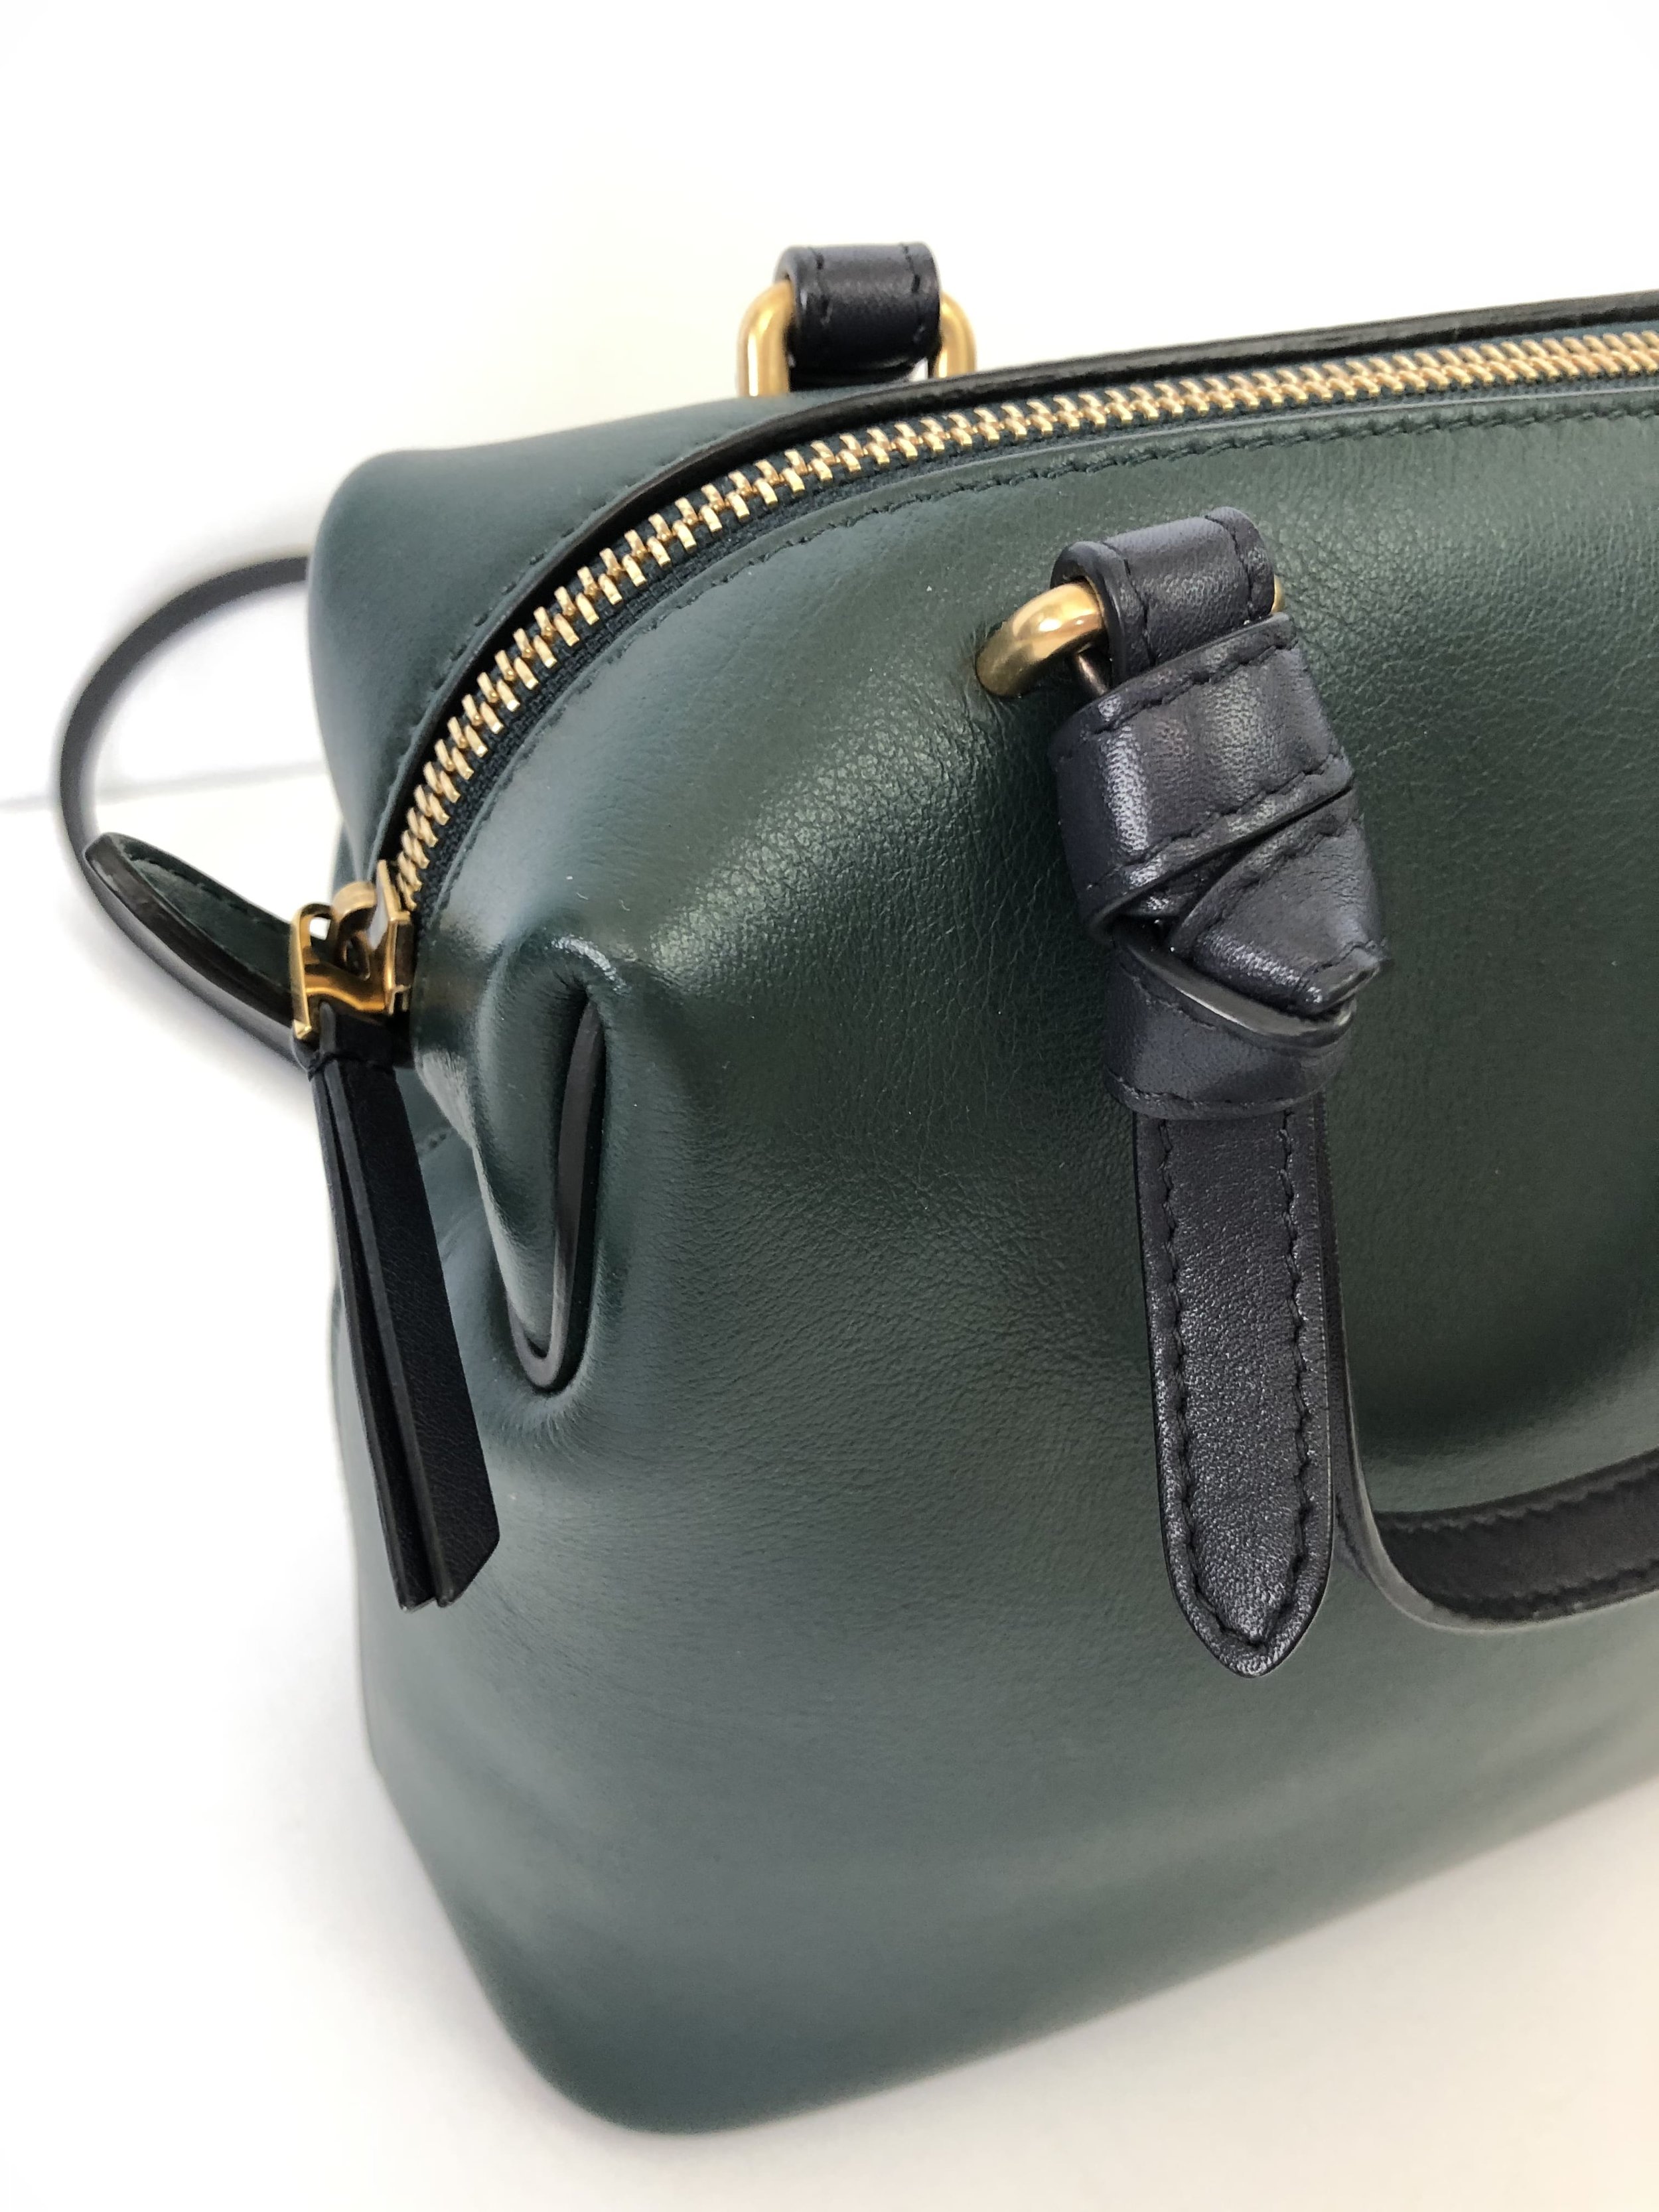 Celine Small Trio Bag Review 2019: How much has changed under Hedi?